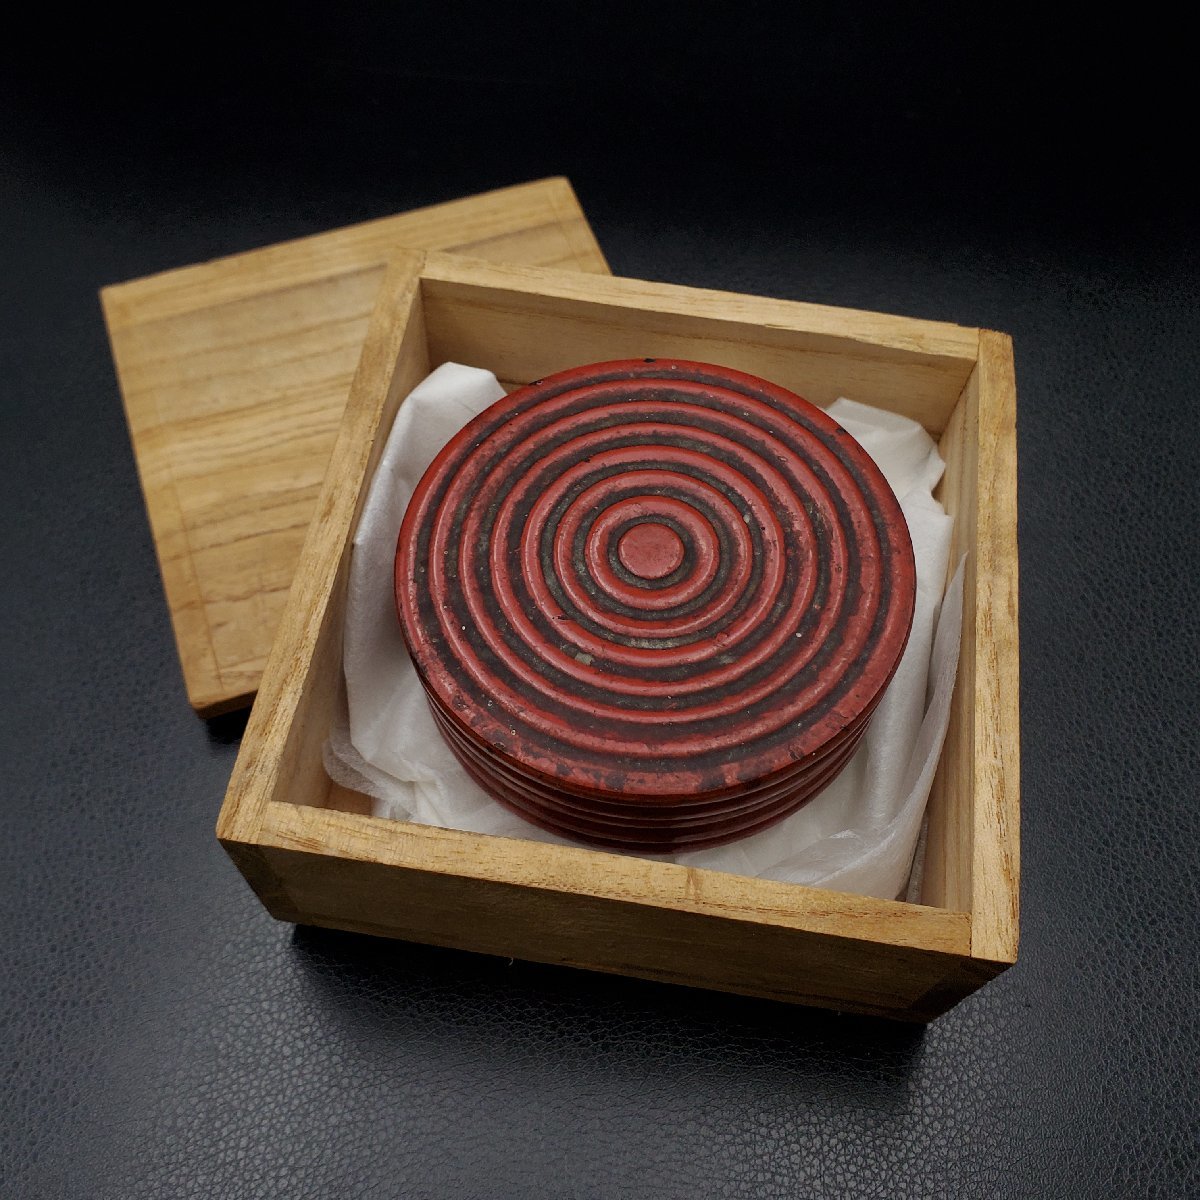 [. warehouse ] era lacquer ware potter's wheel eyes root . incense case 7.5cm tea utensils lacquer coating lacquer tree box 